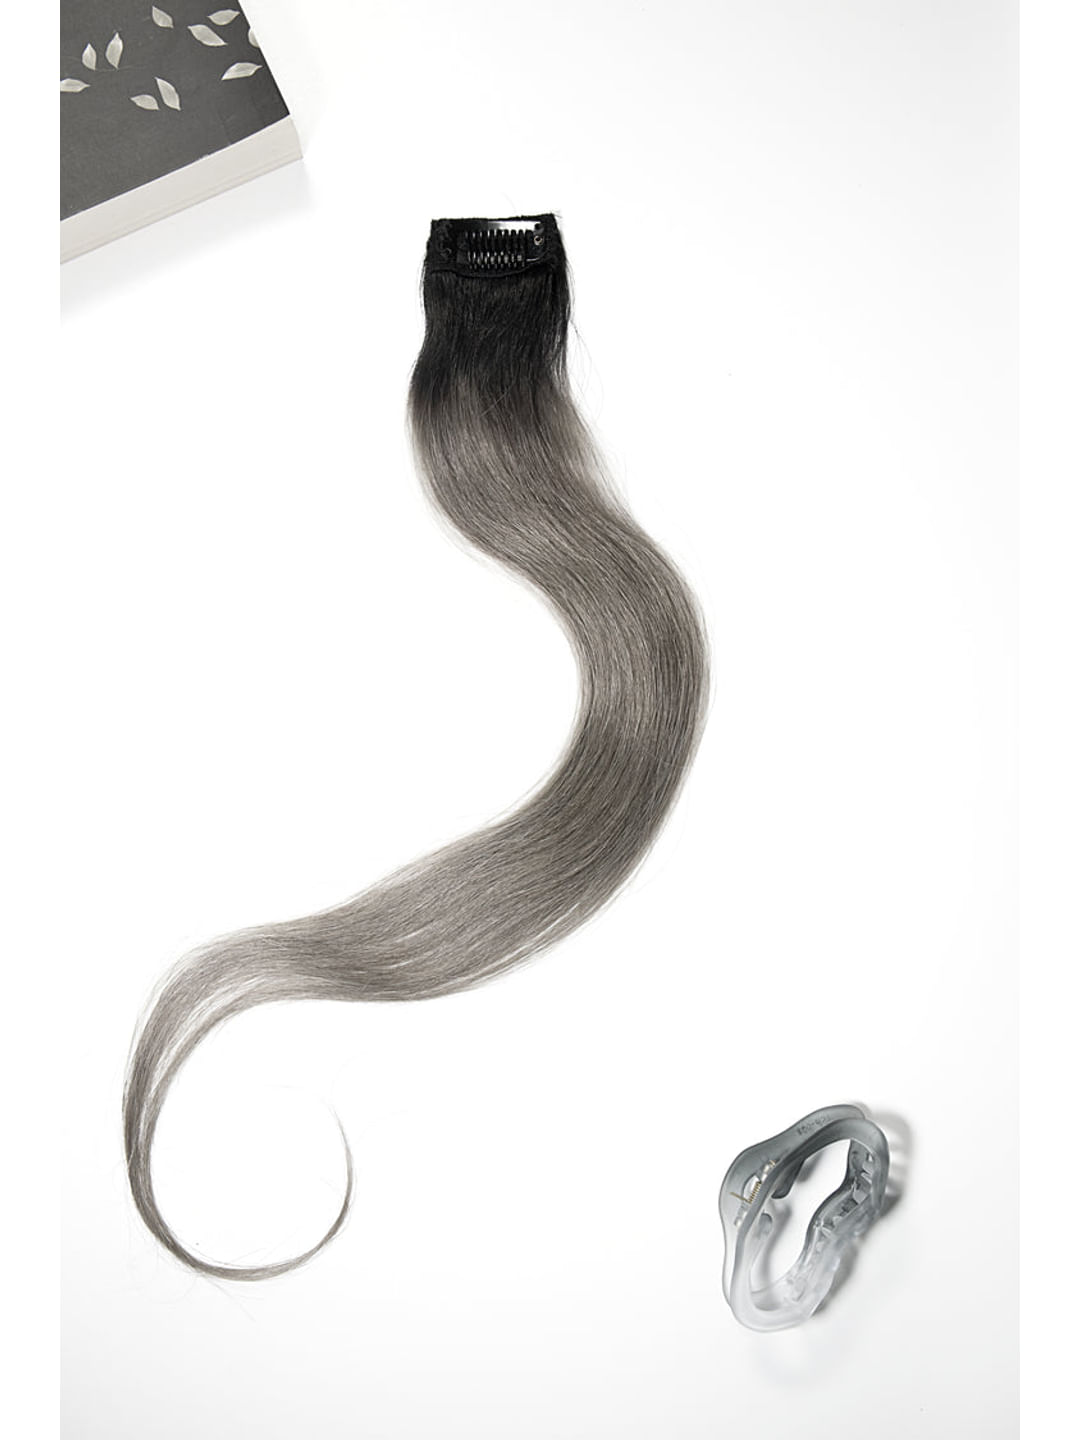 ASH GREY COLORED CLIP IN HAIR STREAKS  (100% HUMAN HAIR EXTENSIONS)